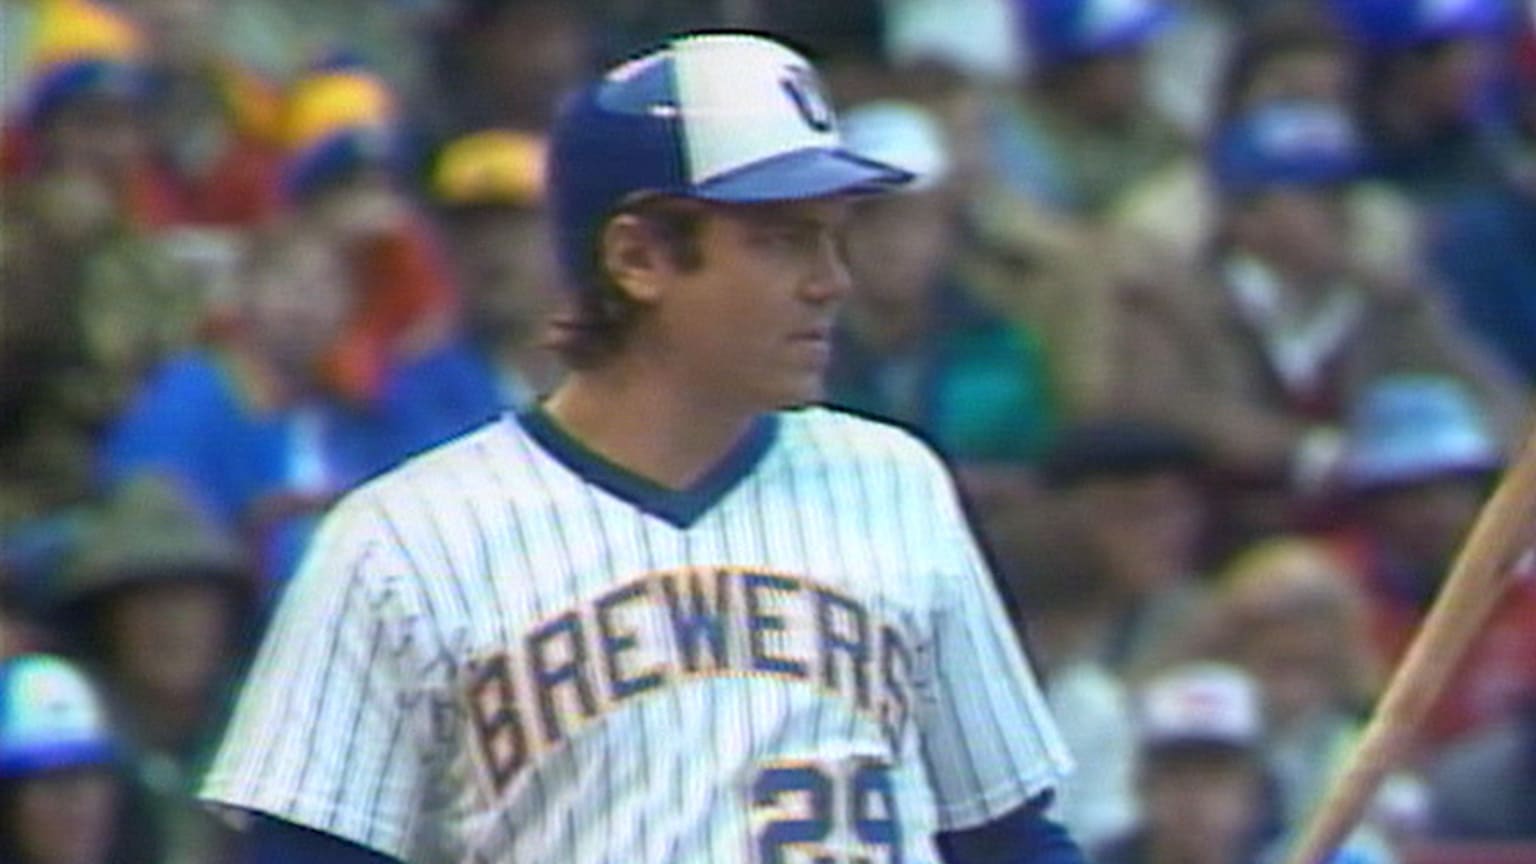 Mark Brouhard's 3-hit game, 10/09/1982